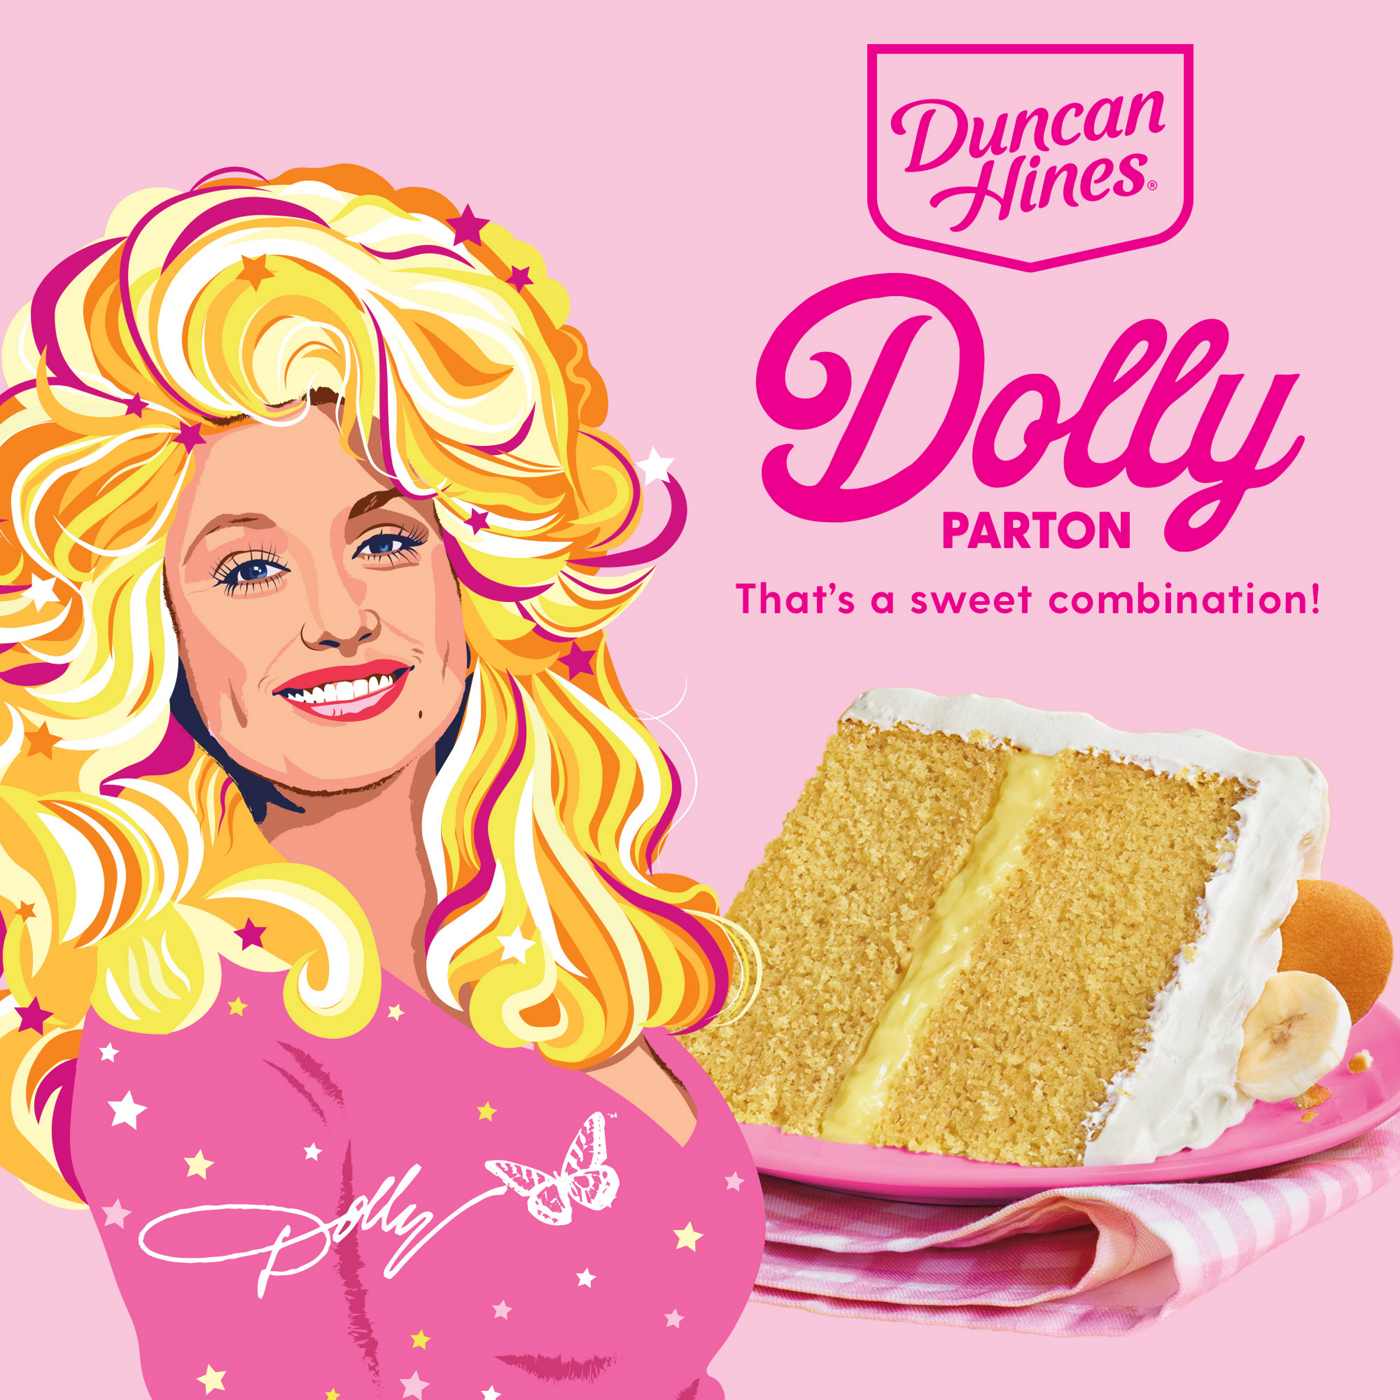 Duncan Hines Dolly Parton's Favorite Southern-Style Banana Flavored Cake Mix; image 3 of 7